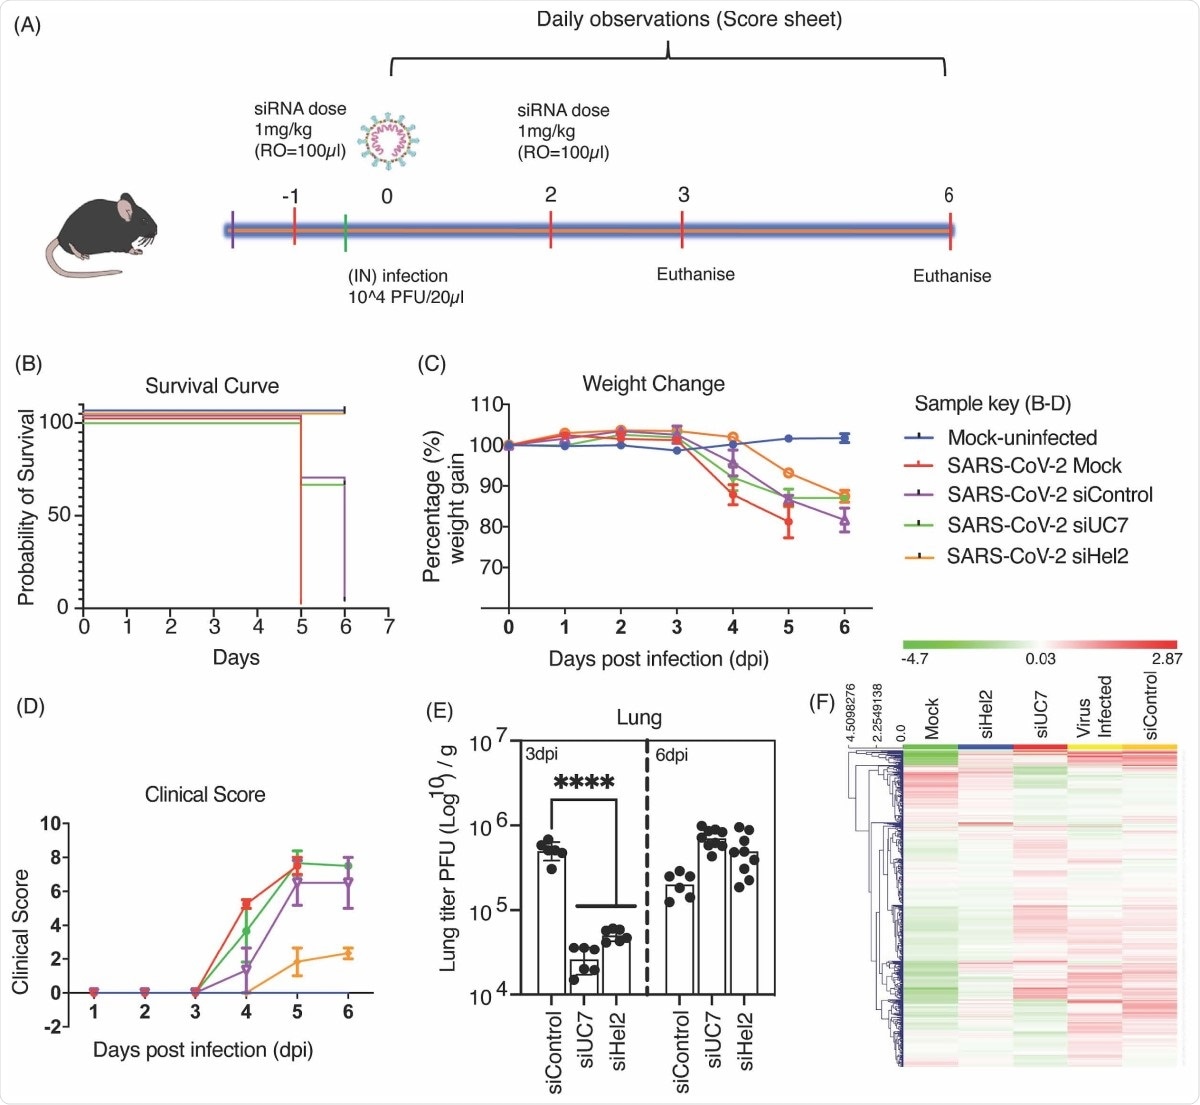 Intravenous administered sLNP-siRNA repression of COVID-19 in vivo. (A) 7–13-week-old K18-hACE.2 female and male mice were intranasally infected with either PBS or 104 PFU/ 20 μL of SARS-CoV-2 (Australian VIC1 strain, passage 4). (A) Mice were intravenously treated with 1 mg/kg in 100 μL of siRNA packaged into HFDM lipid nanoparticles (LNP) by retroorbital administration at -1 and 2 days post infection (dpi). At 3dpi and 6dpi lung and brain tissues were harvested and homogenized for immunoplaque assays. (B-D) Mouse survivorship, probability of survival, body weight (weight change), and clinical score were evaluated at the indicated days post-infection (dpi). (B) Weight loss >15% was taken as an endpoint and mice were euthanized. (C) Mice were weighed and scored daily until the experimental end point (6 dpi), for disease progression. (D) The clinical score was evaluated based on locomotion, behaviour and appearance. Each data point represents the average ± SEM of 3 to 4 mice. (E) The amount of infectious virus particles in lung tissues at 3 and 6 dpi were titrated by immunoplaque assays on Vero E6 cells, using a SARS-CoV-2 N protein specific antibody and expressed as PFU per gram of tissue. Each data point represents a technical replicate, where one mouse is equivalent to 3 technical replicates and bars represent the average ± SEM. (F) An unsupervised hierarchical cluster heatmap of immune gene expression in the lungs at 6dpi. Each row is a gene and each column is a treatment group. Rows are Z-score normalised (Green: low expression and red: high expression). A p value of <0.0001 (****) is considered statistically significant when assessed by 2-way ANOVA (Dunnett’s post- test) when compared against siControl.